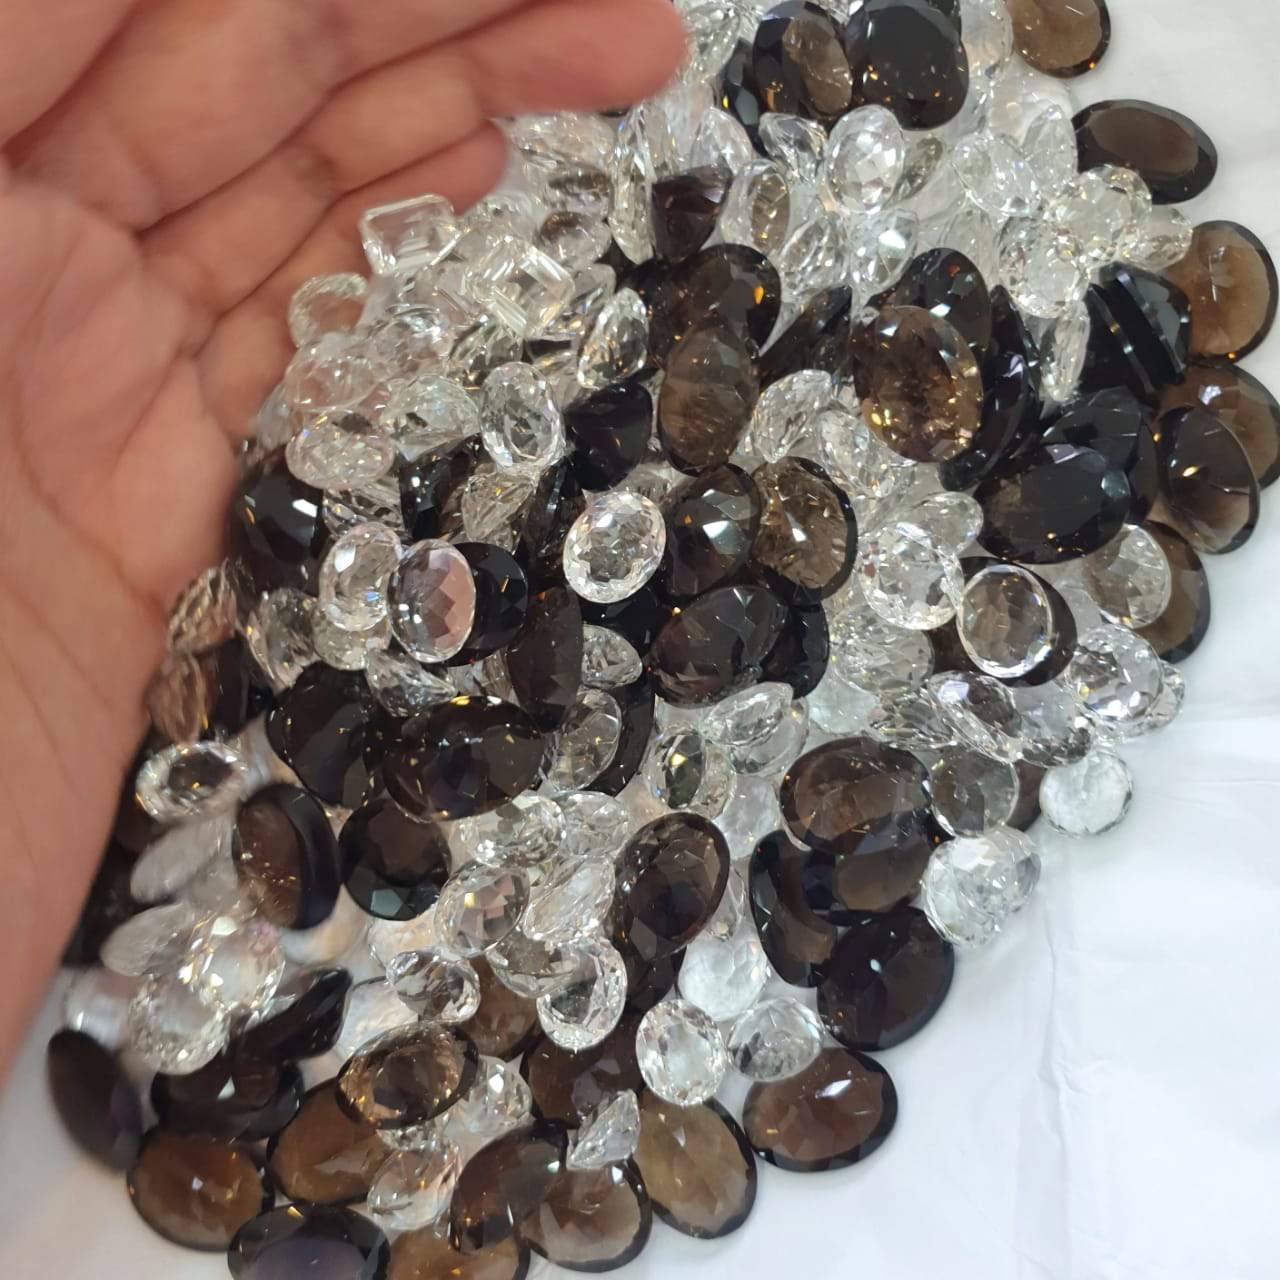 Sale 🔥 20pcs Natural Clear and Smoky Quartz Flawless | TOP quality Halloween Offer - The LabradoriteKing